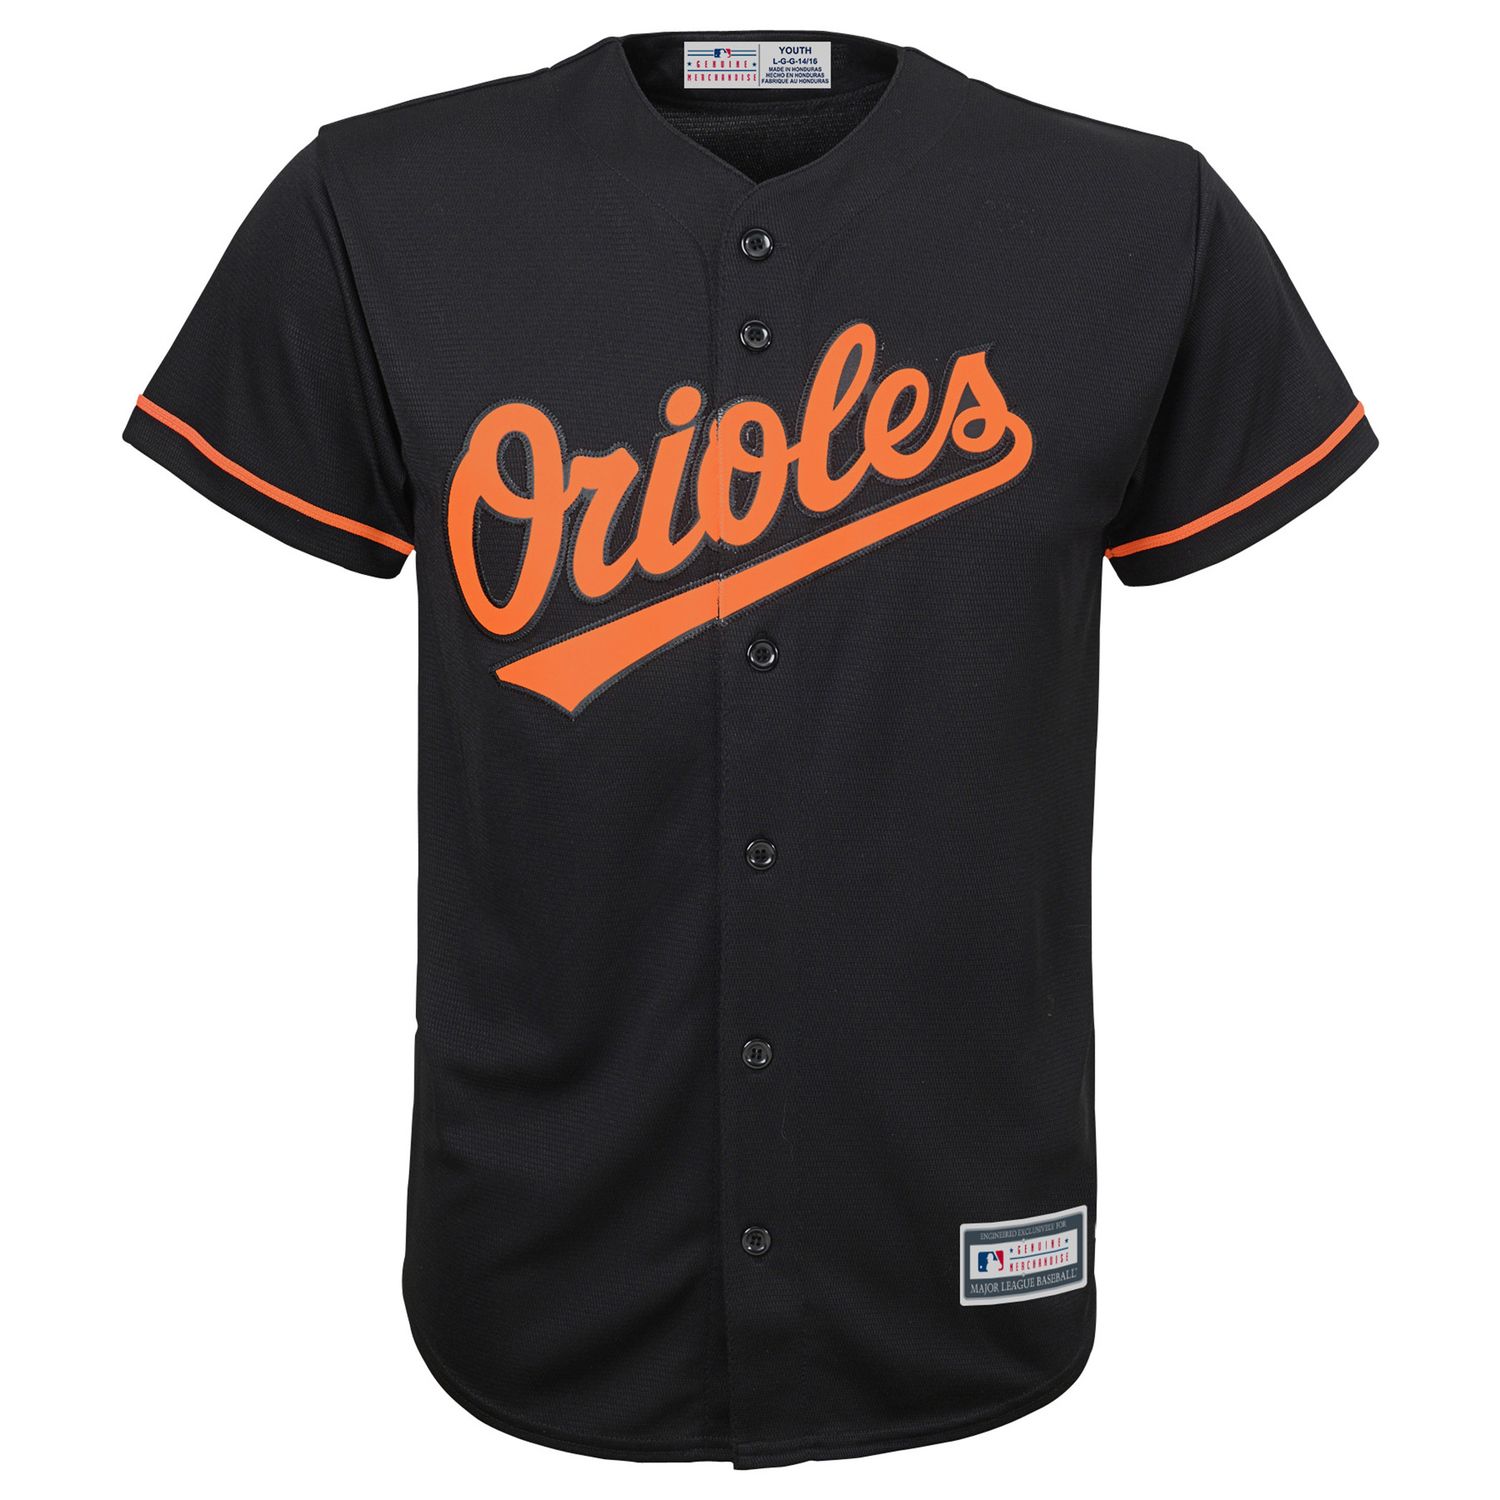 20 on orioles jersey